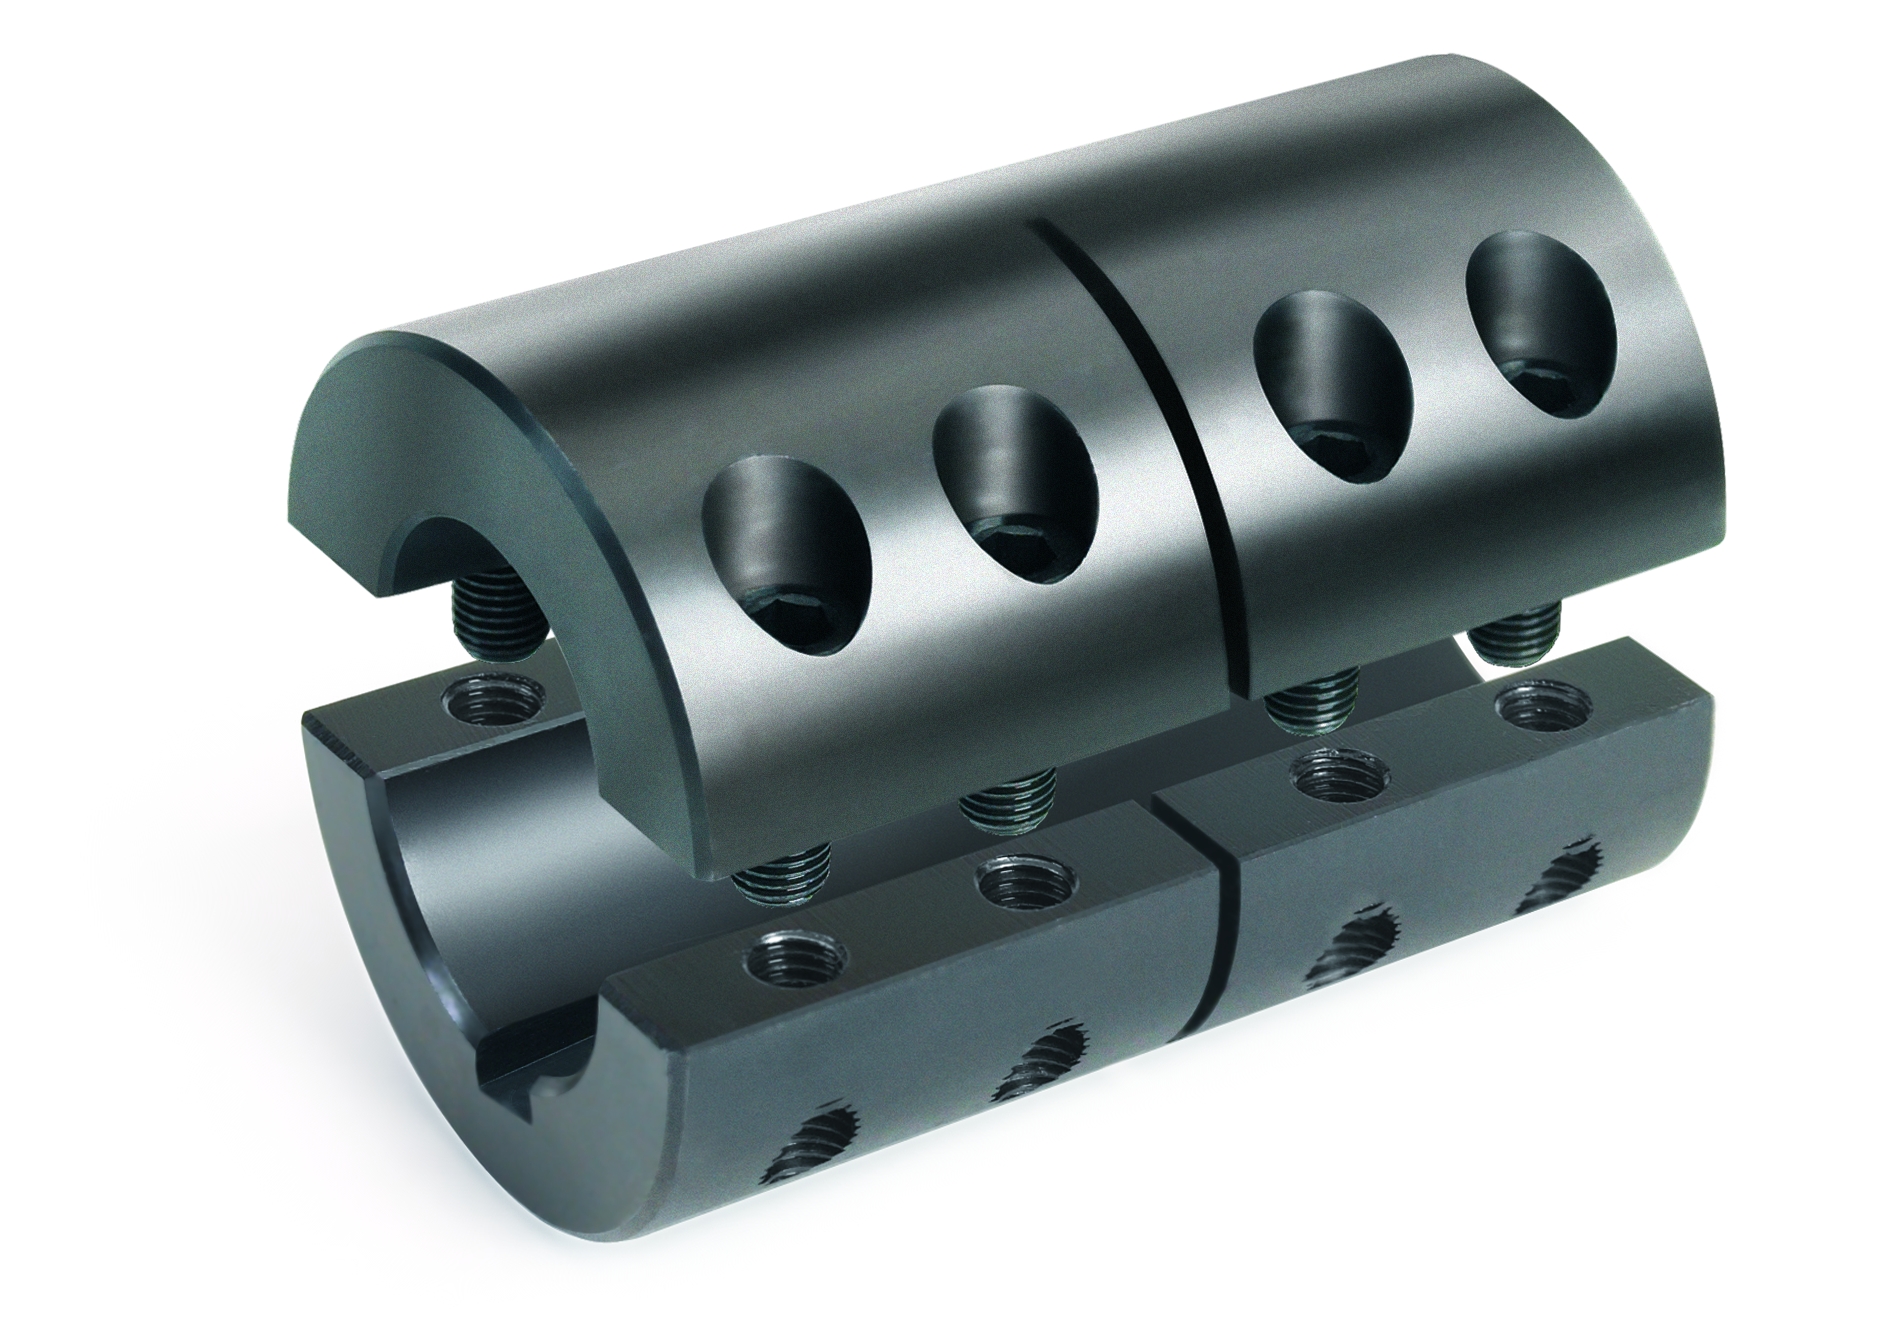 Side 2CC Series Black Oxide Climax Metal Products 2CC-125-125-KW Two-Piece Clamping Couplings Recessed Screw w/Keyway 2CC-Series ASTM A108 Side 1: 1.2500 in Bore Steel Bore 